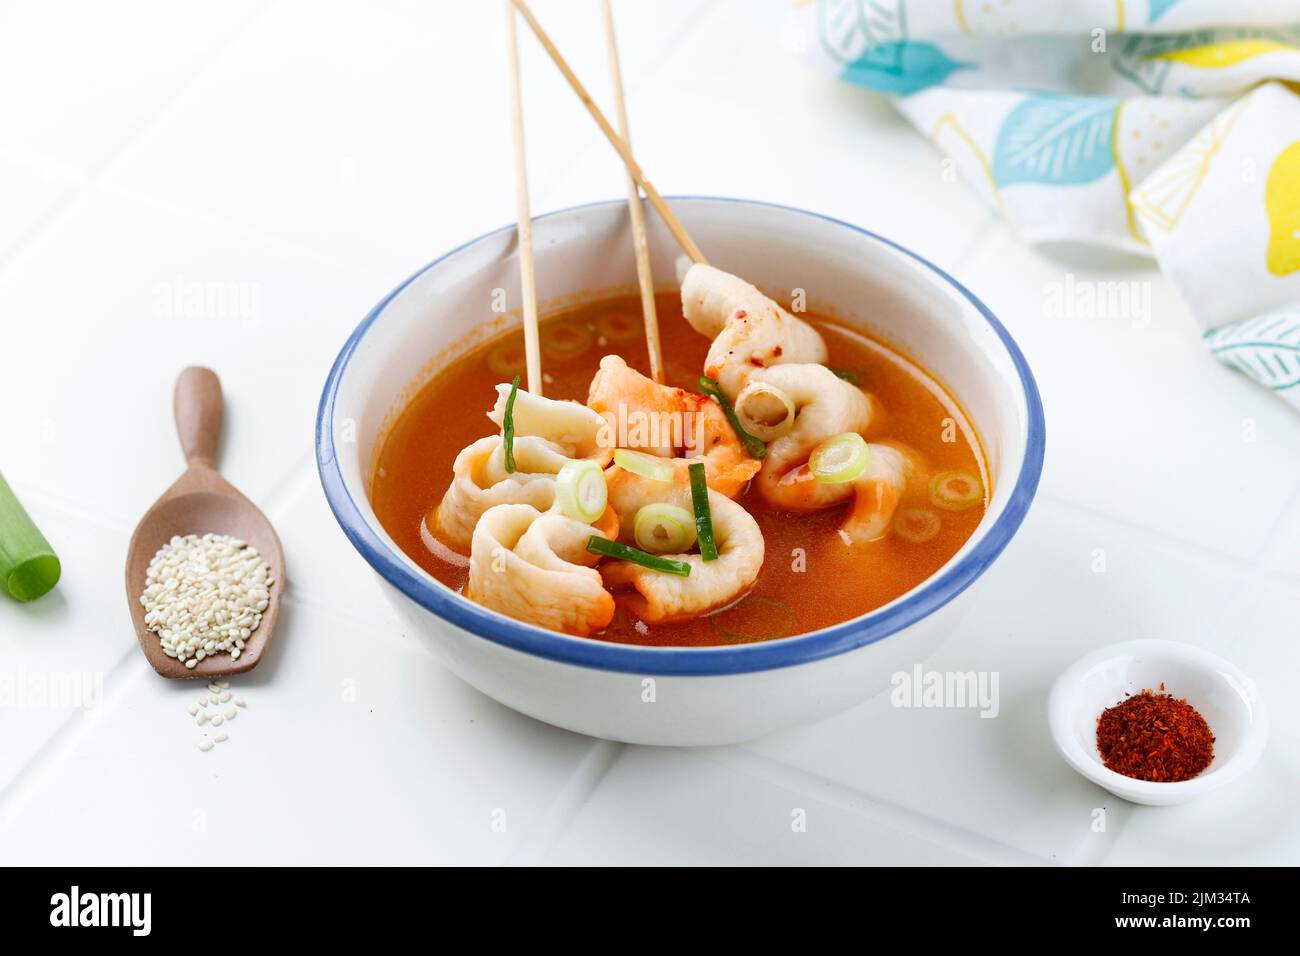 Eomukguk or Odeng Soup, Korean Popular Street Food Made from Fish Cake Eomuk and Spicy Gochujang Paste. On White Table Stock Photo